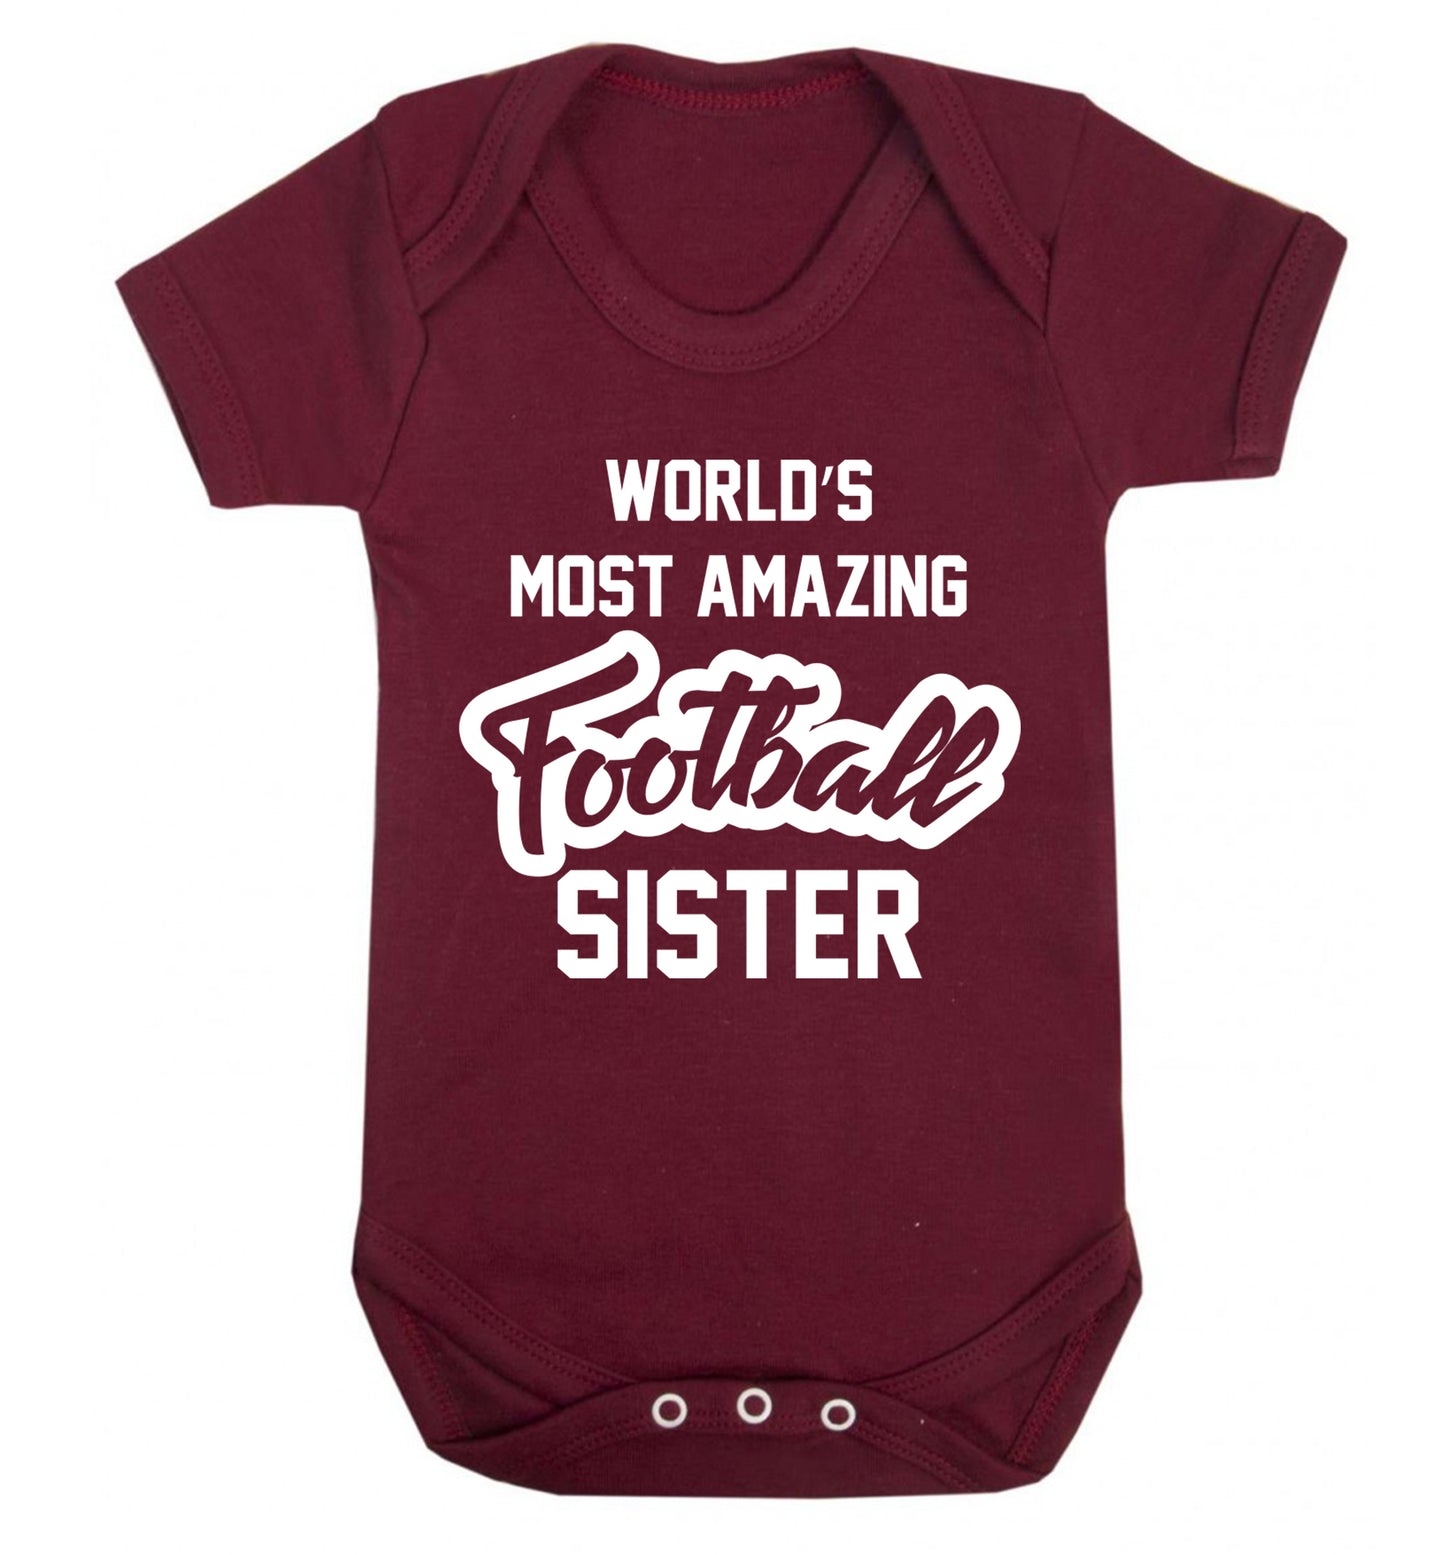 Worlds most amazing football sister Baby Vest maroon 18-24 months